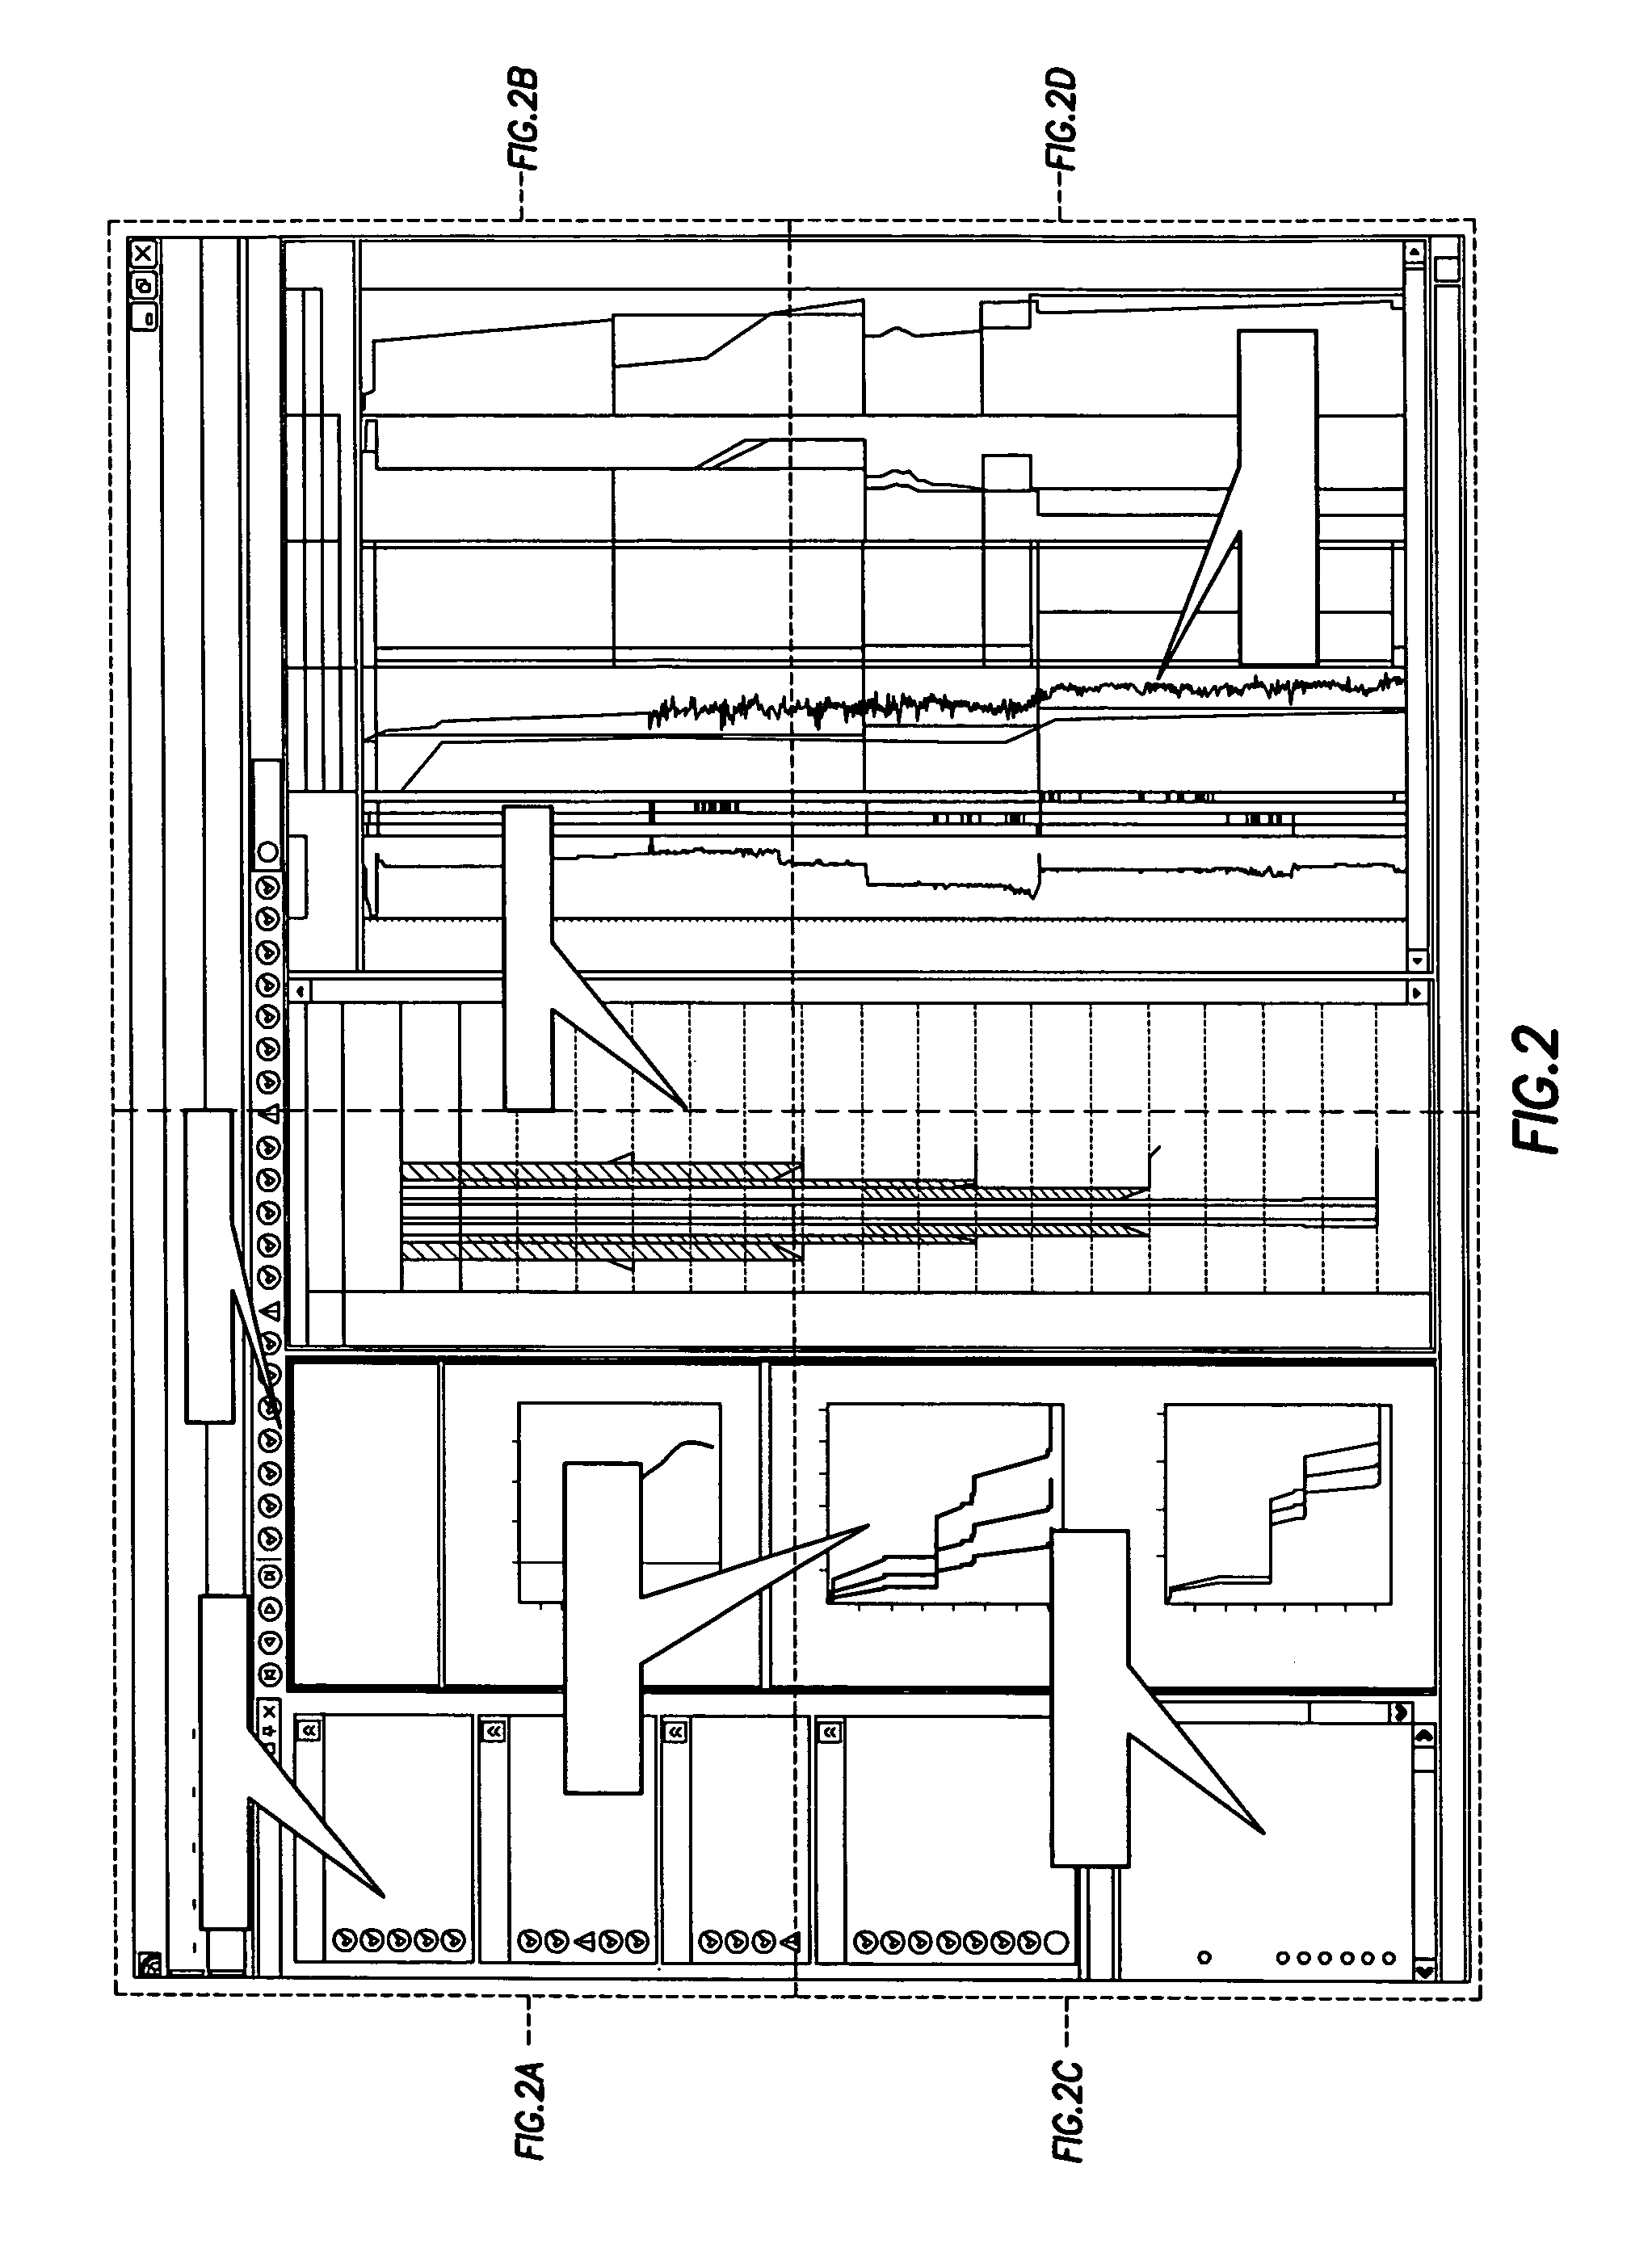 Method and apparatus and program storage device adapted for automatic qualitative and quantitative risk assessment based on technical wellbore design and earth properties